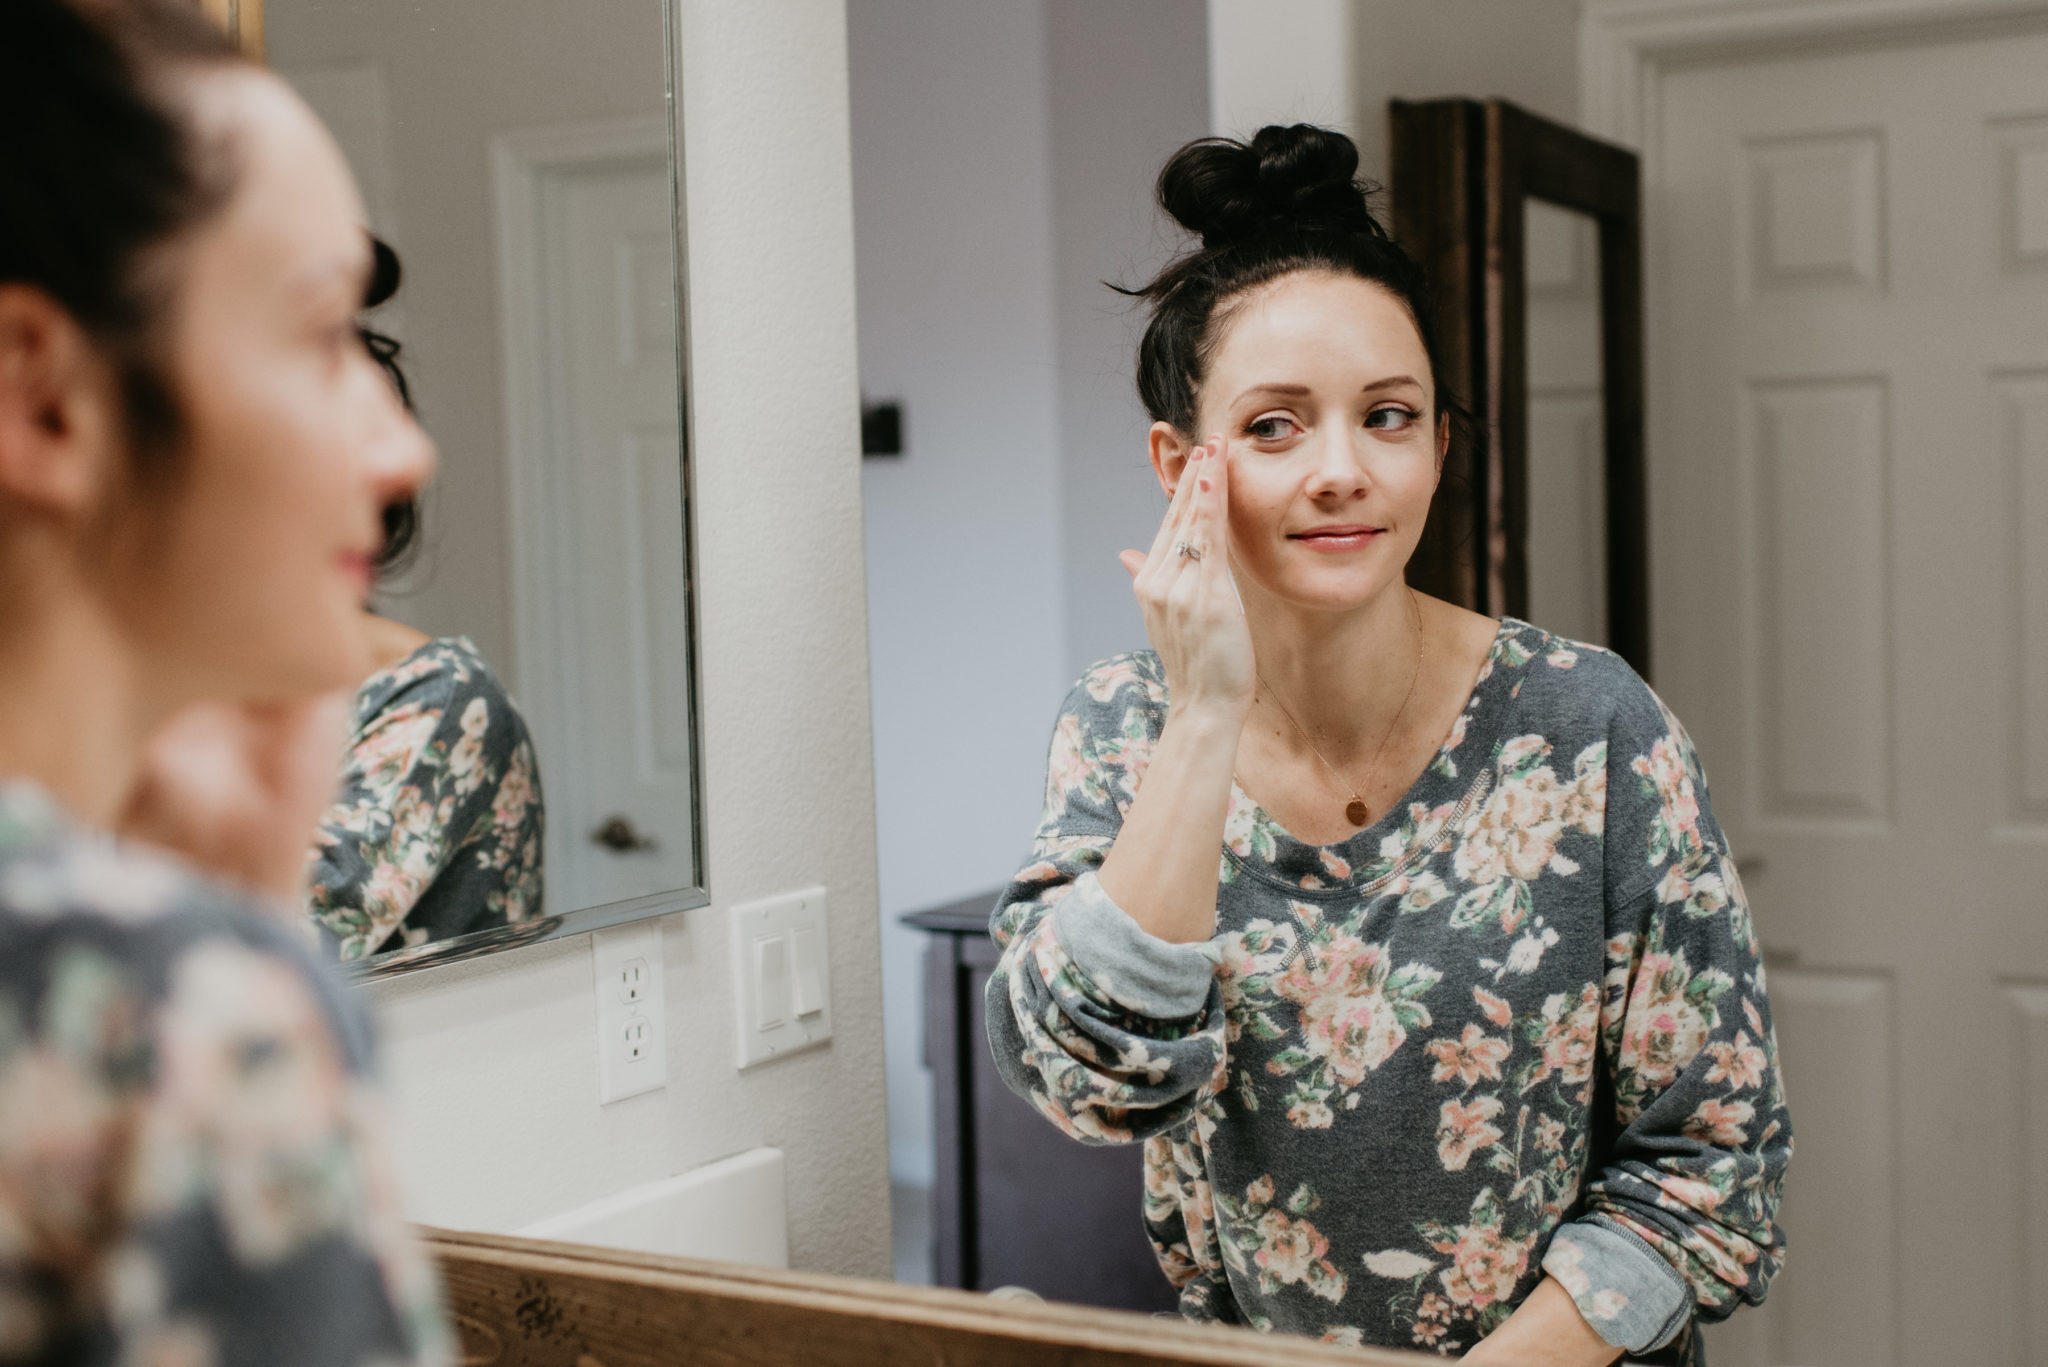 skincare routine - 3 Products I've Added to My Daily Skin Care Routine by popular Las Vegas style blogger Outfits & Outings